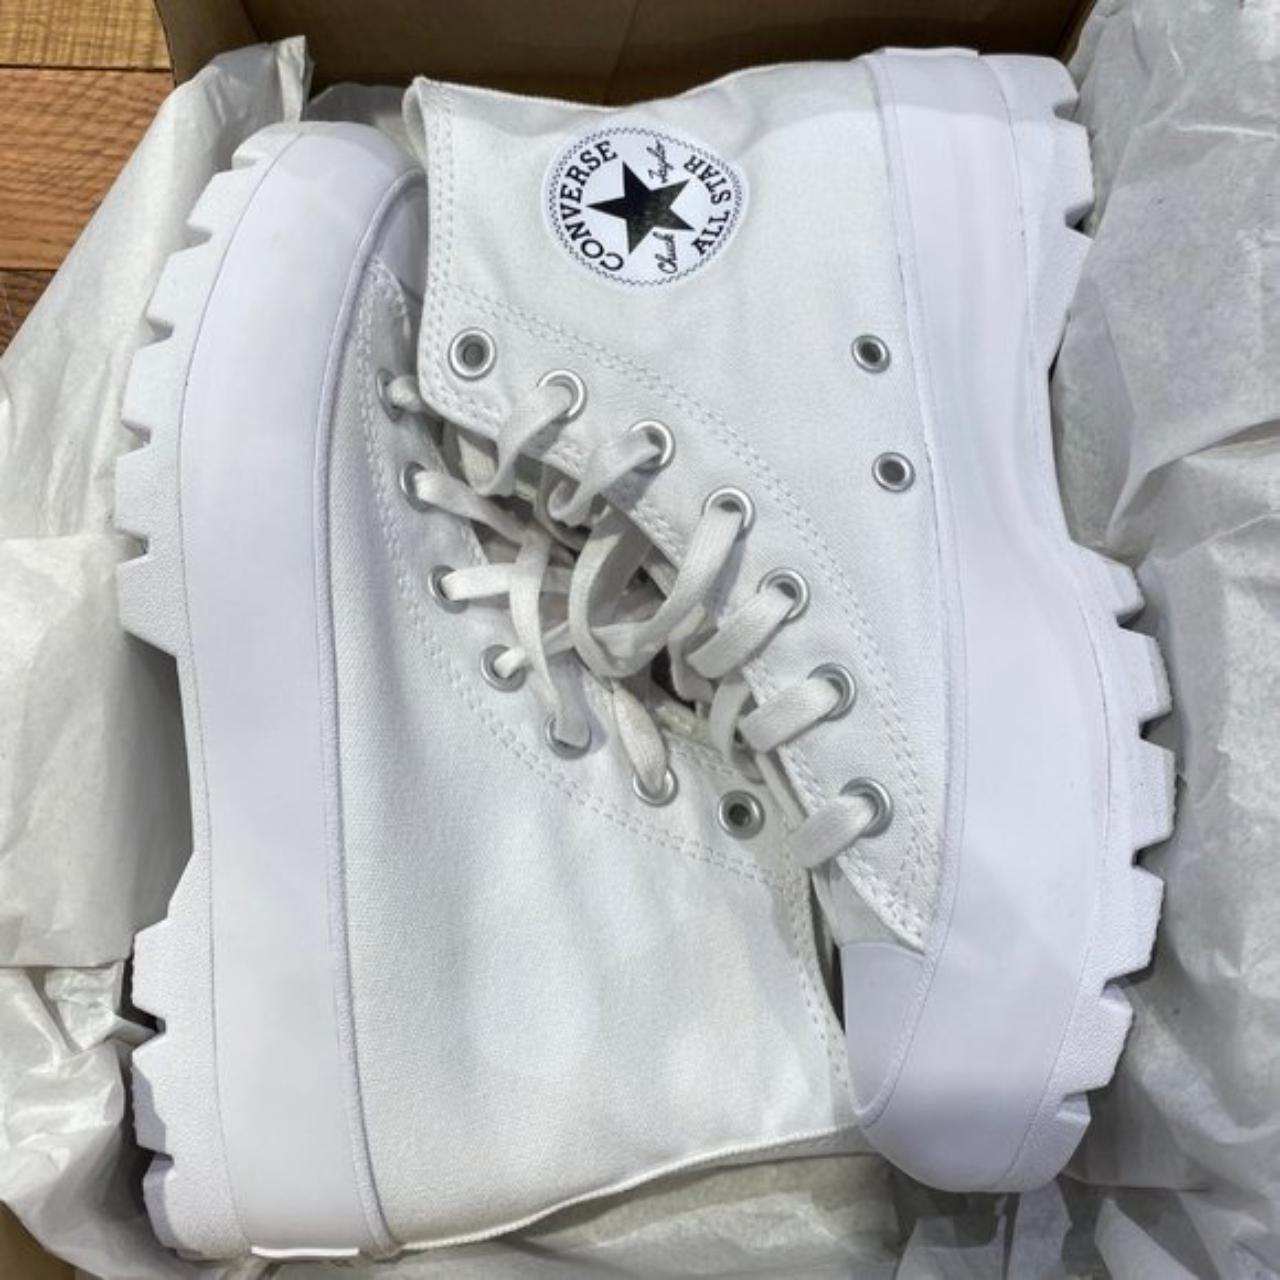 New White Lugged Chuck Taylor All Star Hi... - Depop